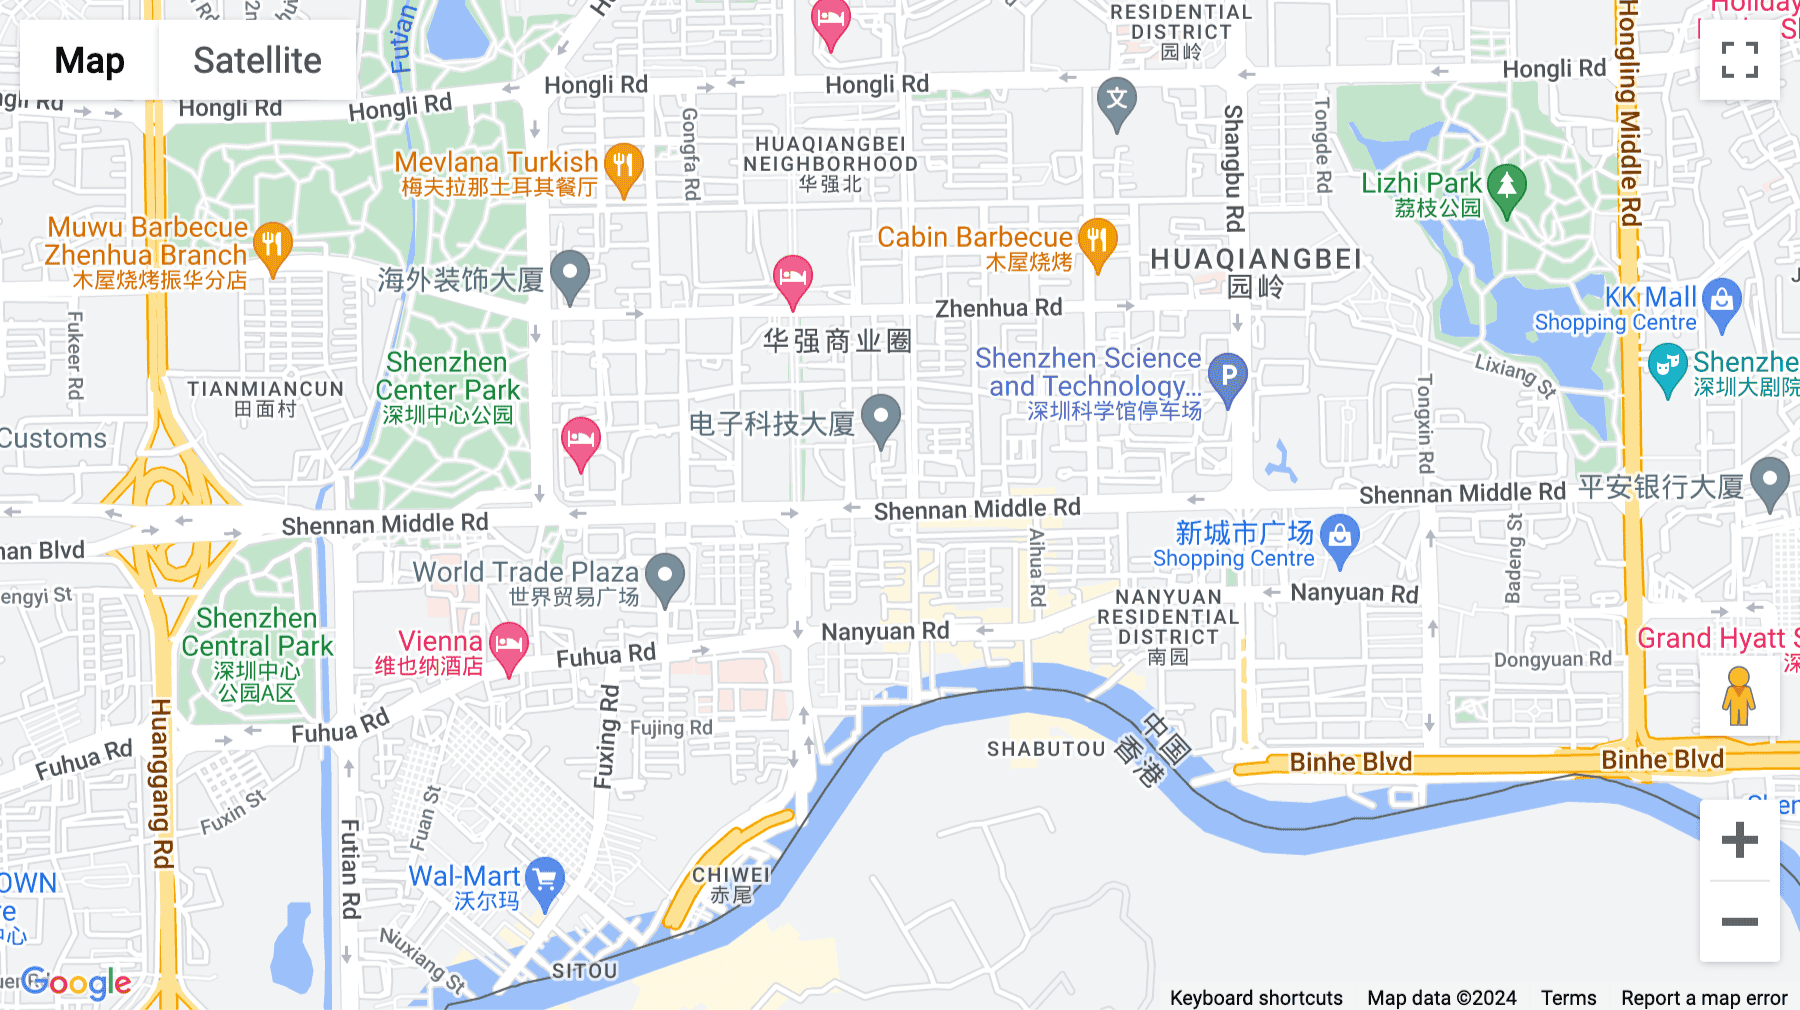 Click for interative map of Building B, Number 2018 Shennan Middle Road, 10th Floor, Xinghua Building, Futian District, Shenzhen